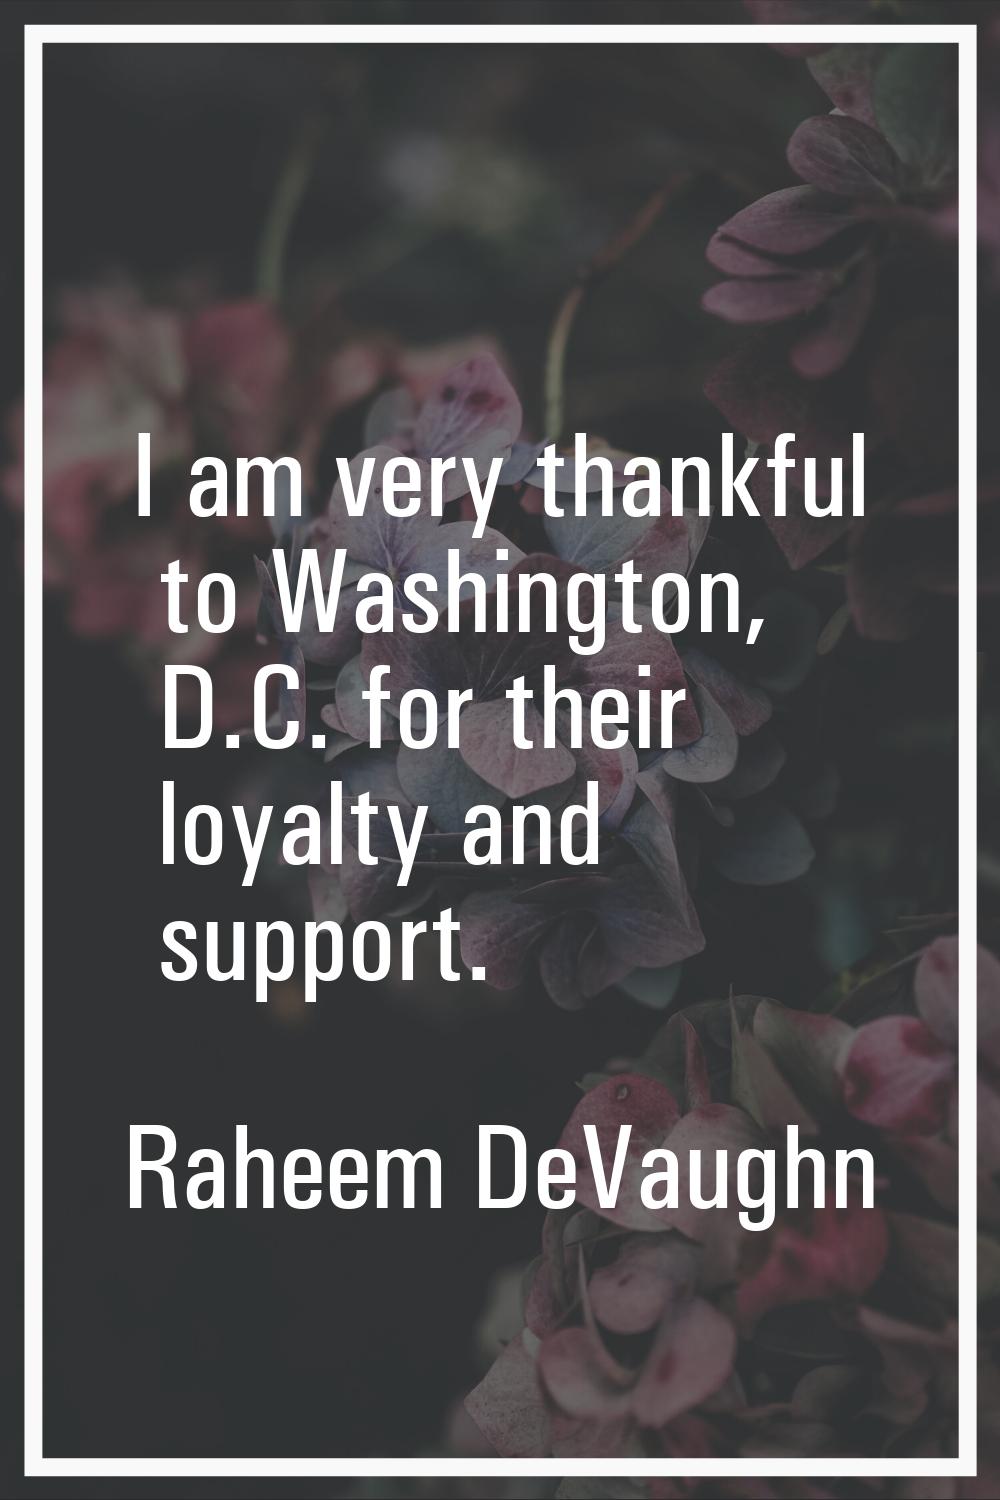 I am very thankful to Washington, D.C. for their loyalty and support.